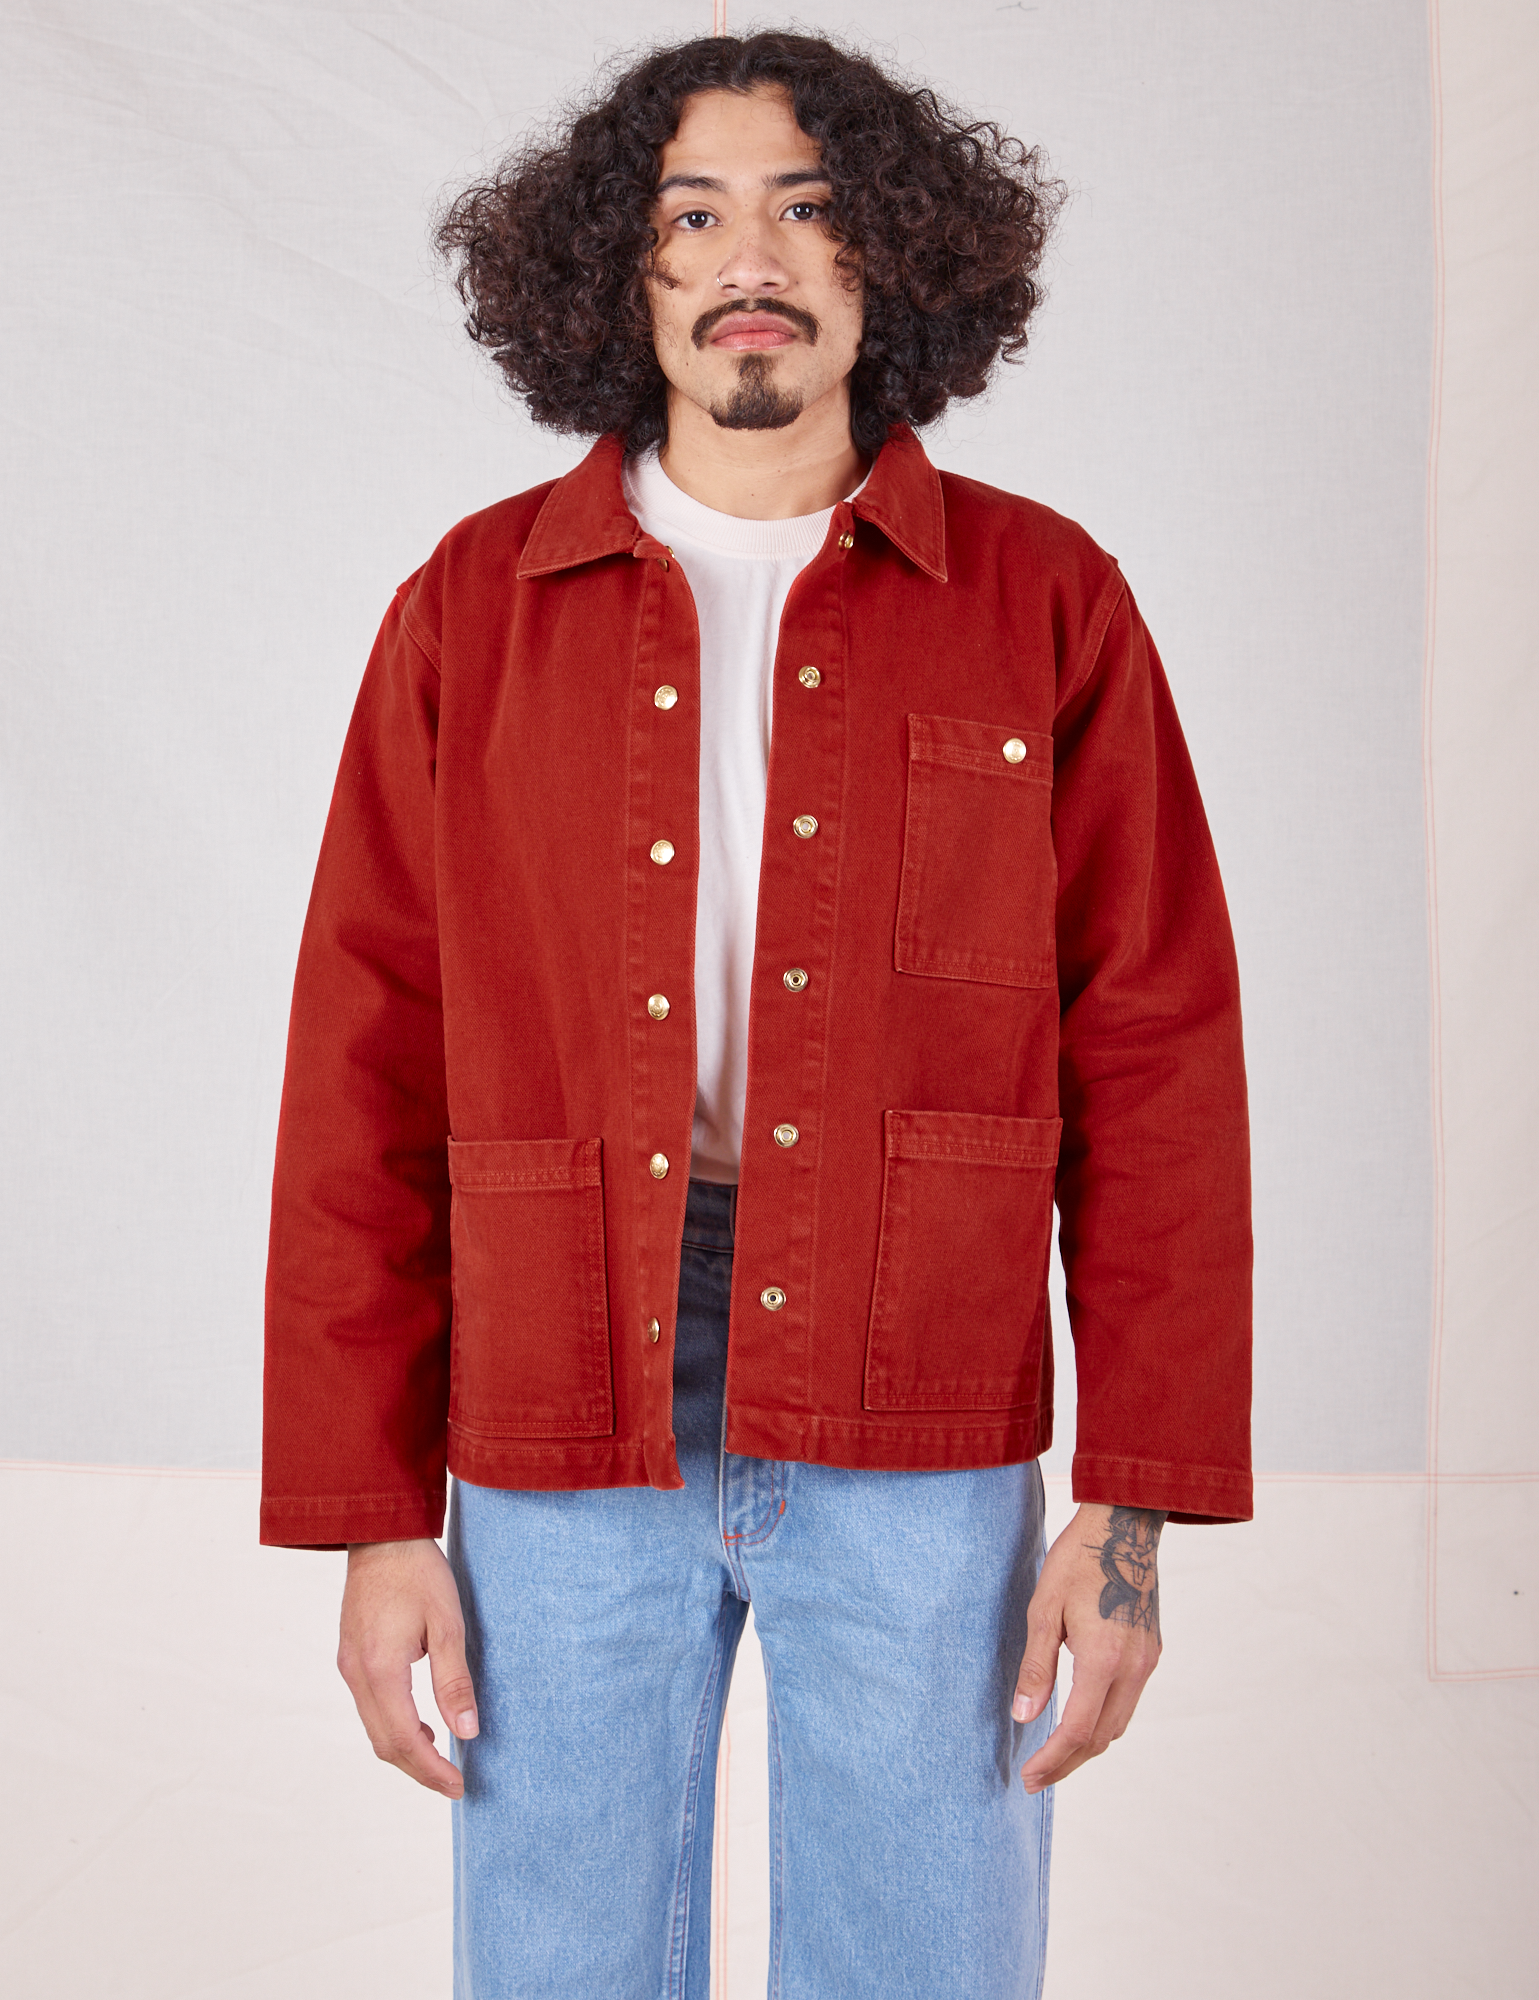 Jesse is 5&#39;8&quot; and wearing S Denim Work Jacket in Paprika